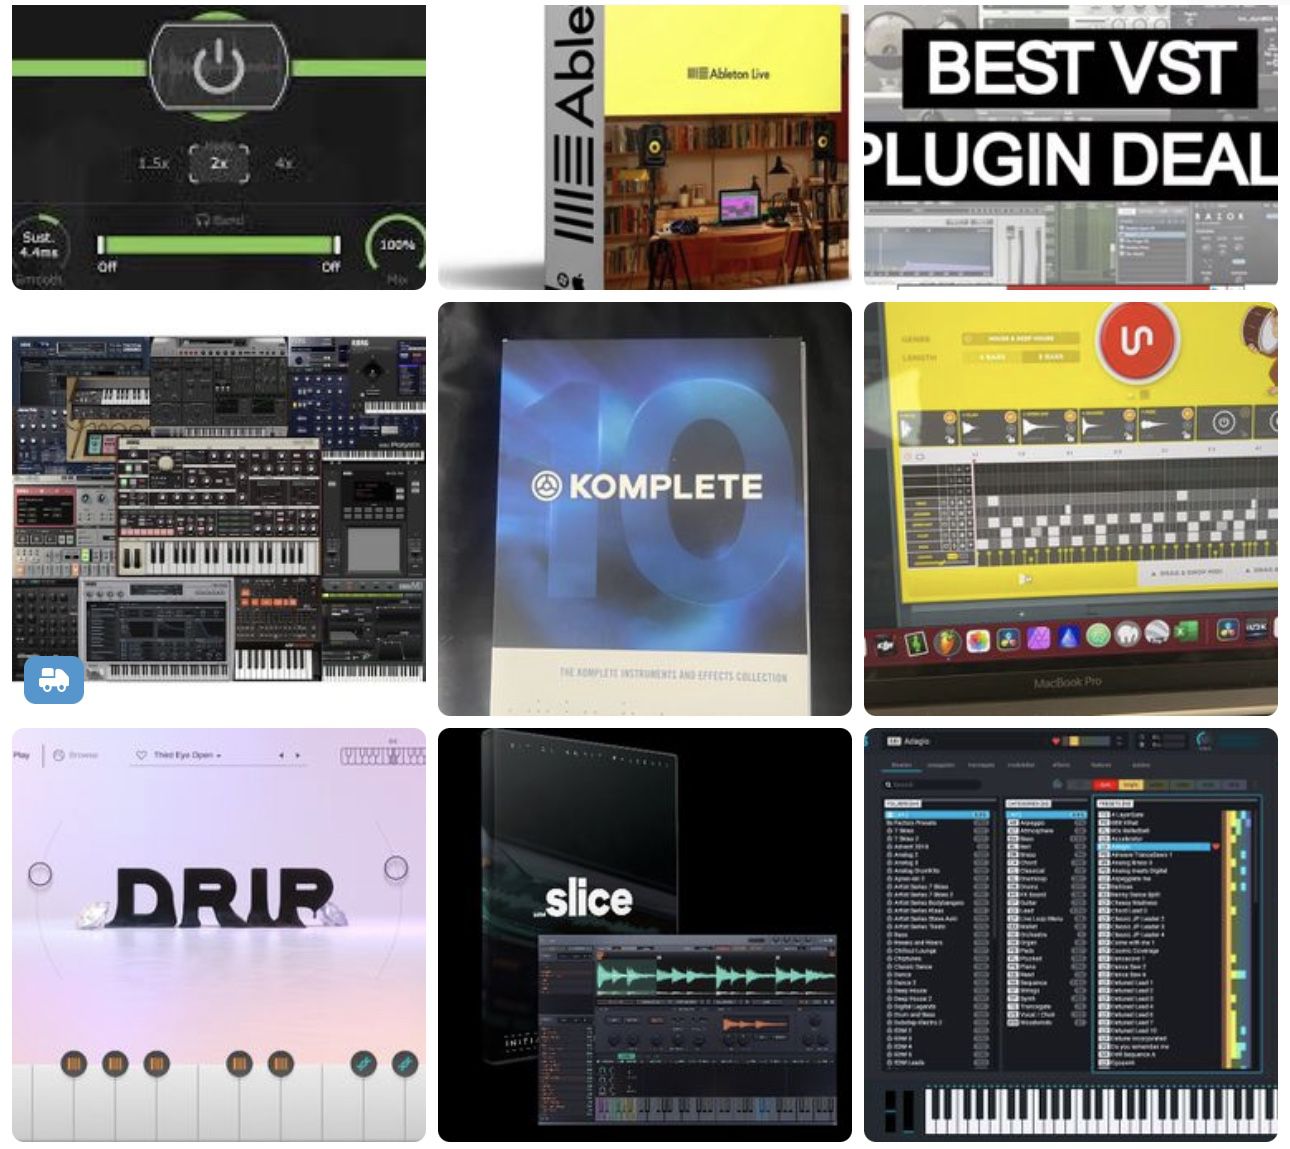 All Vst Plugins And Software Available From $25 Per Vst